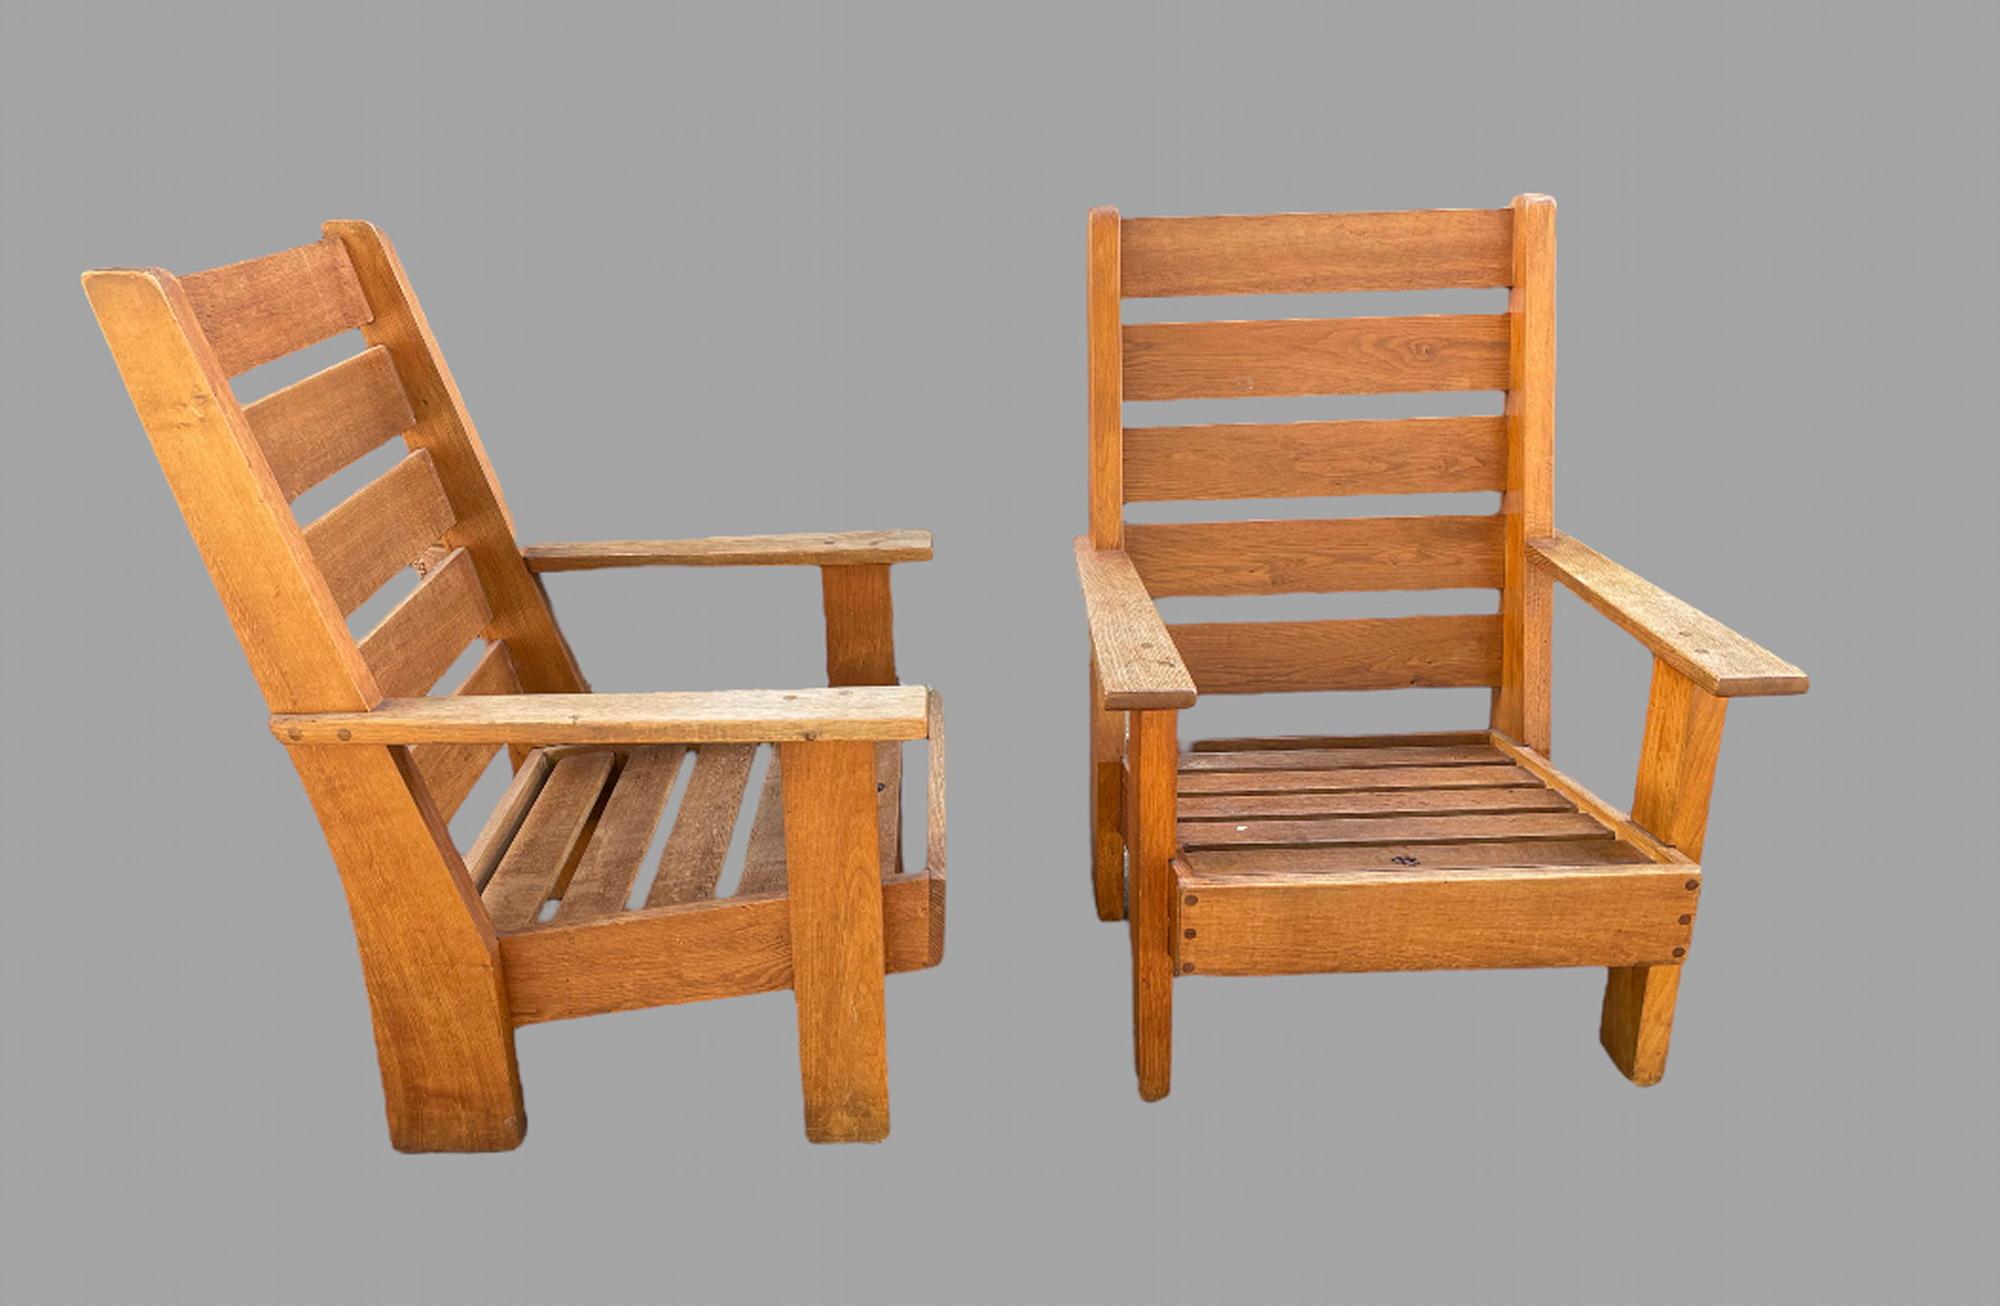 A Fabulous Pair of Unusual French Oak armchairs of good weight, Size and in very solid condition in arts and crafts style, both come with burnt stamp saying 'Atelier' with a name that cannot be made out. Measures: Seat depth 59 cm and seat height 40